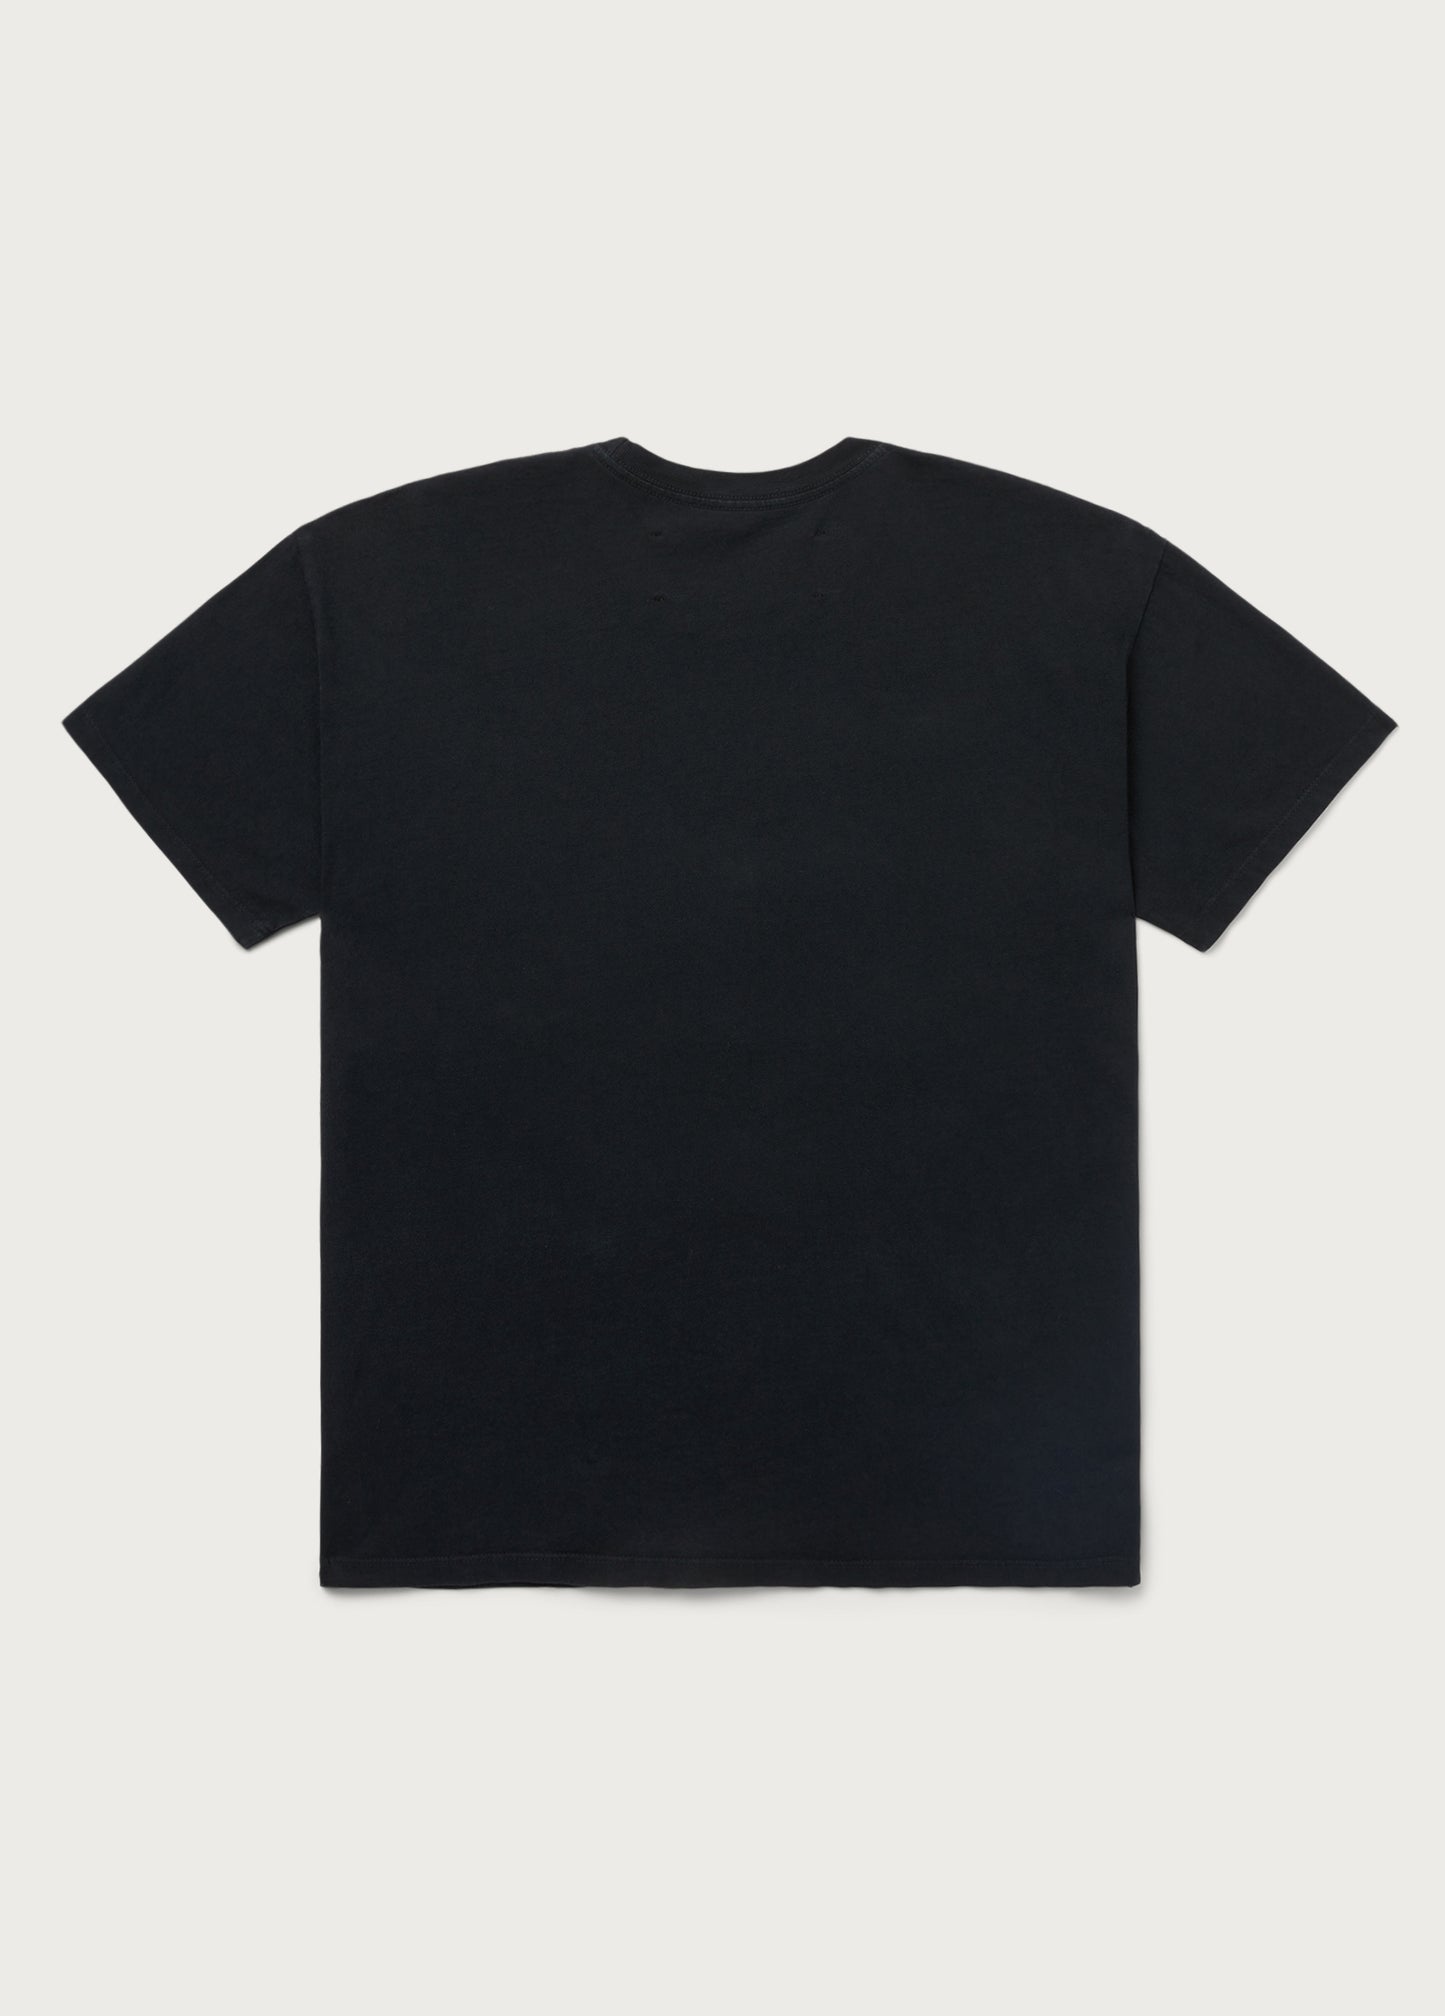 Statues Making Sound Tee | Washed Black